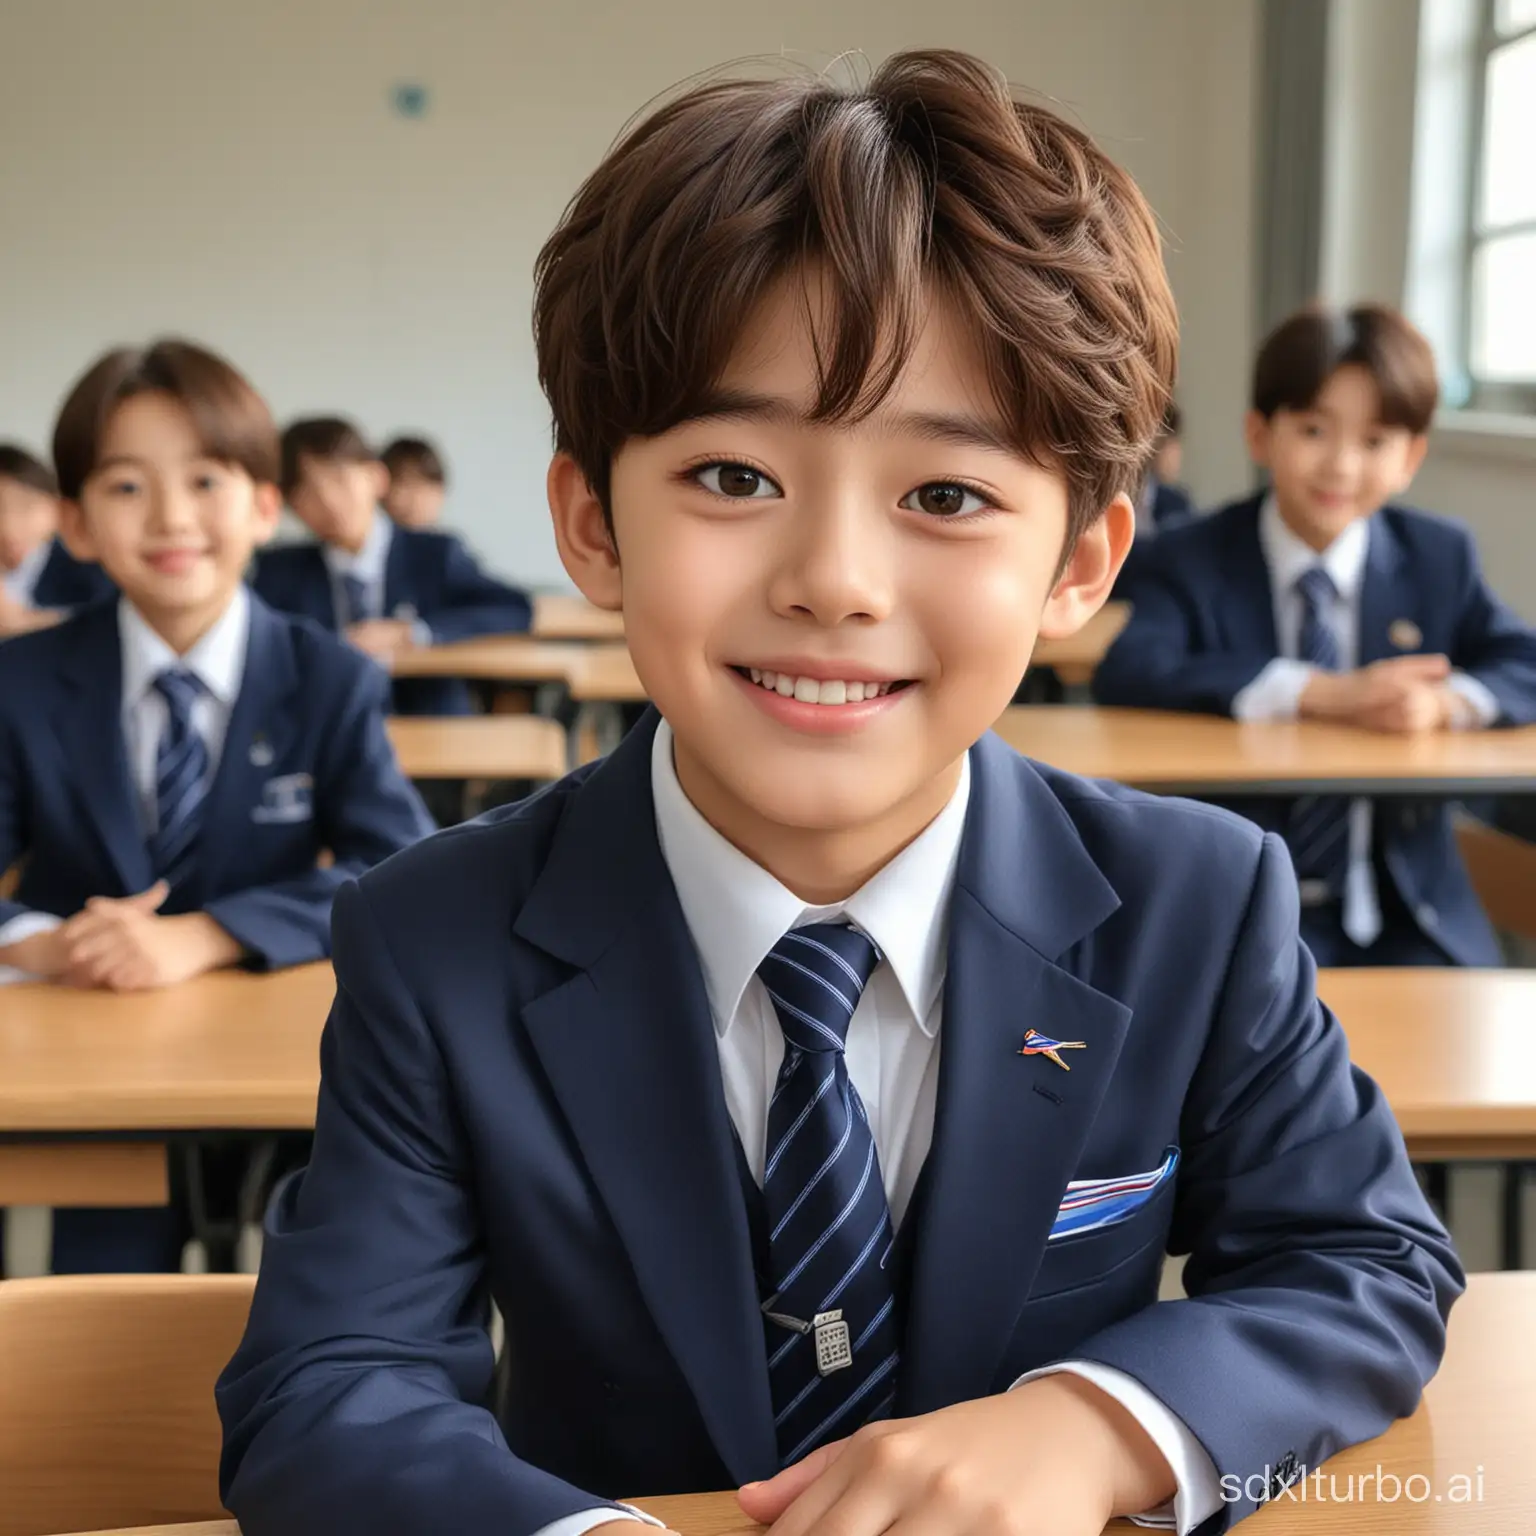 Charming-7YearOld-Boy-in-Class-with-Teacher-and-Classmates